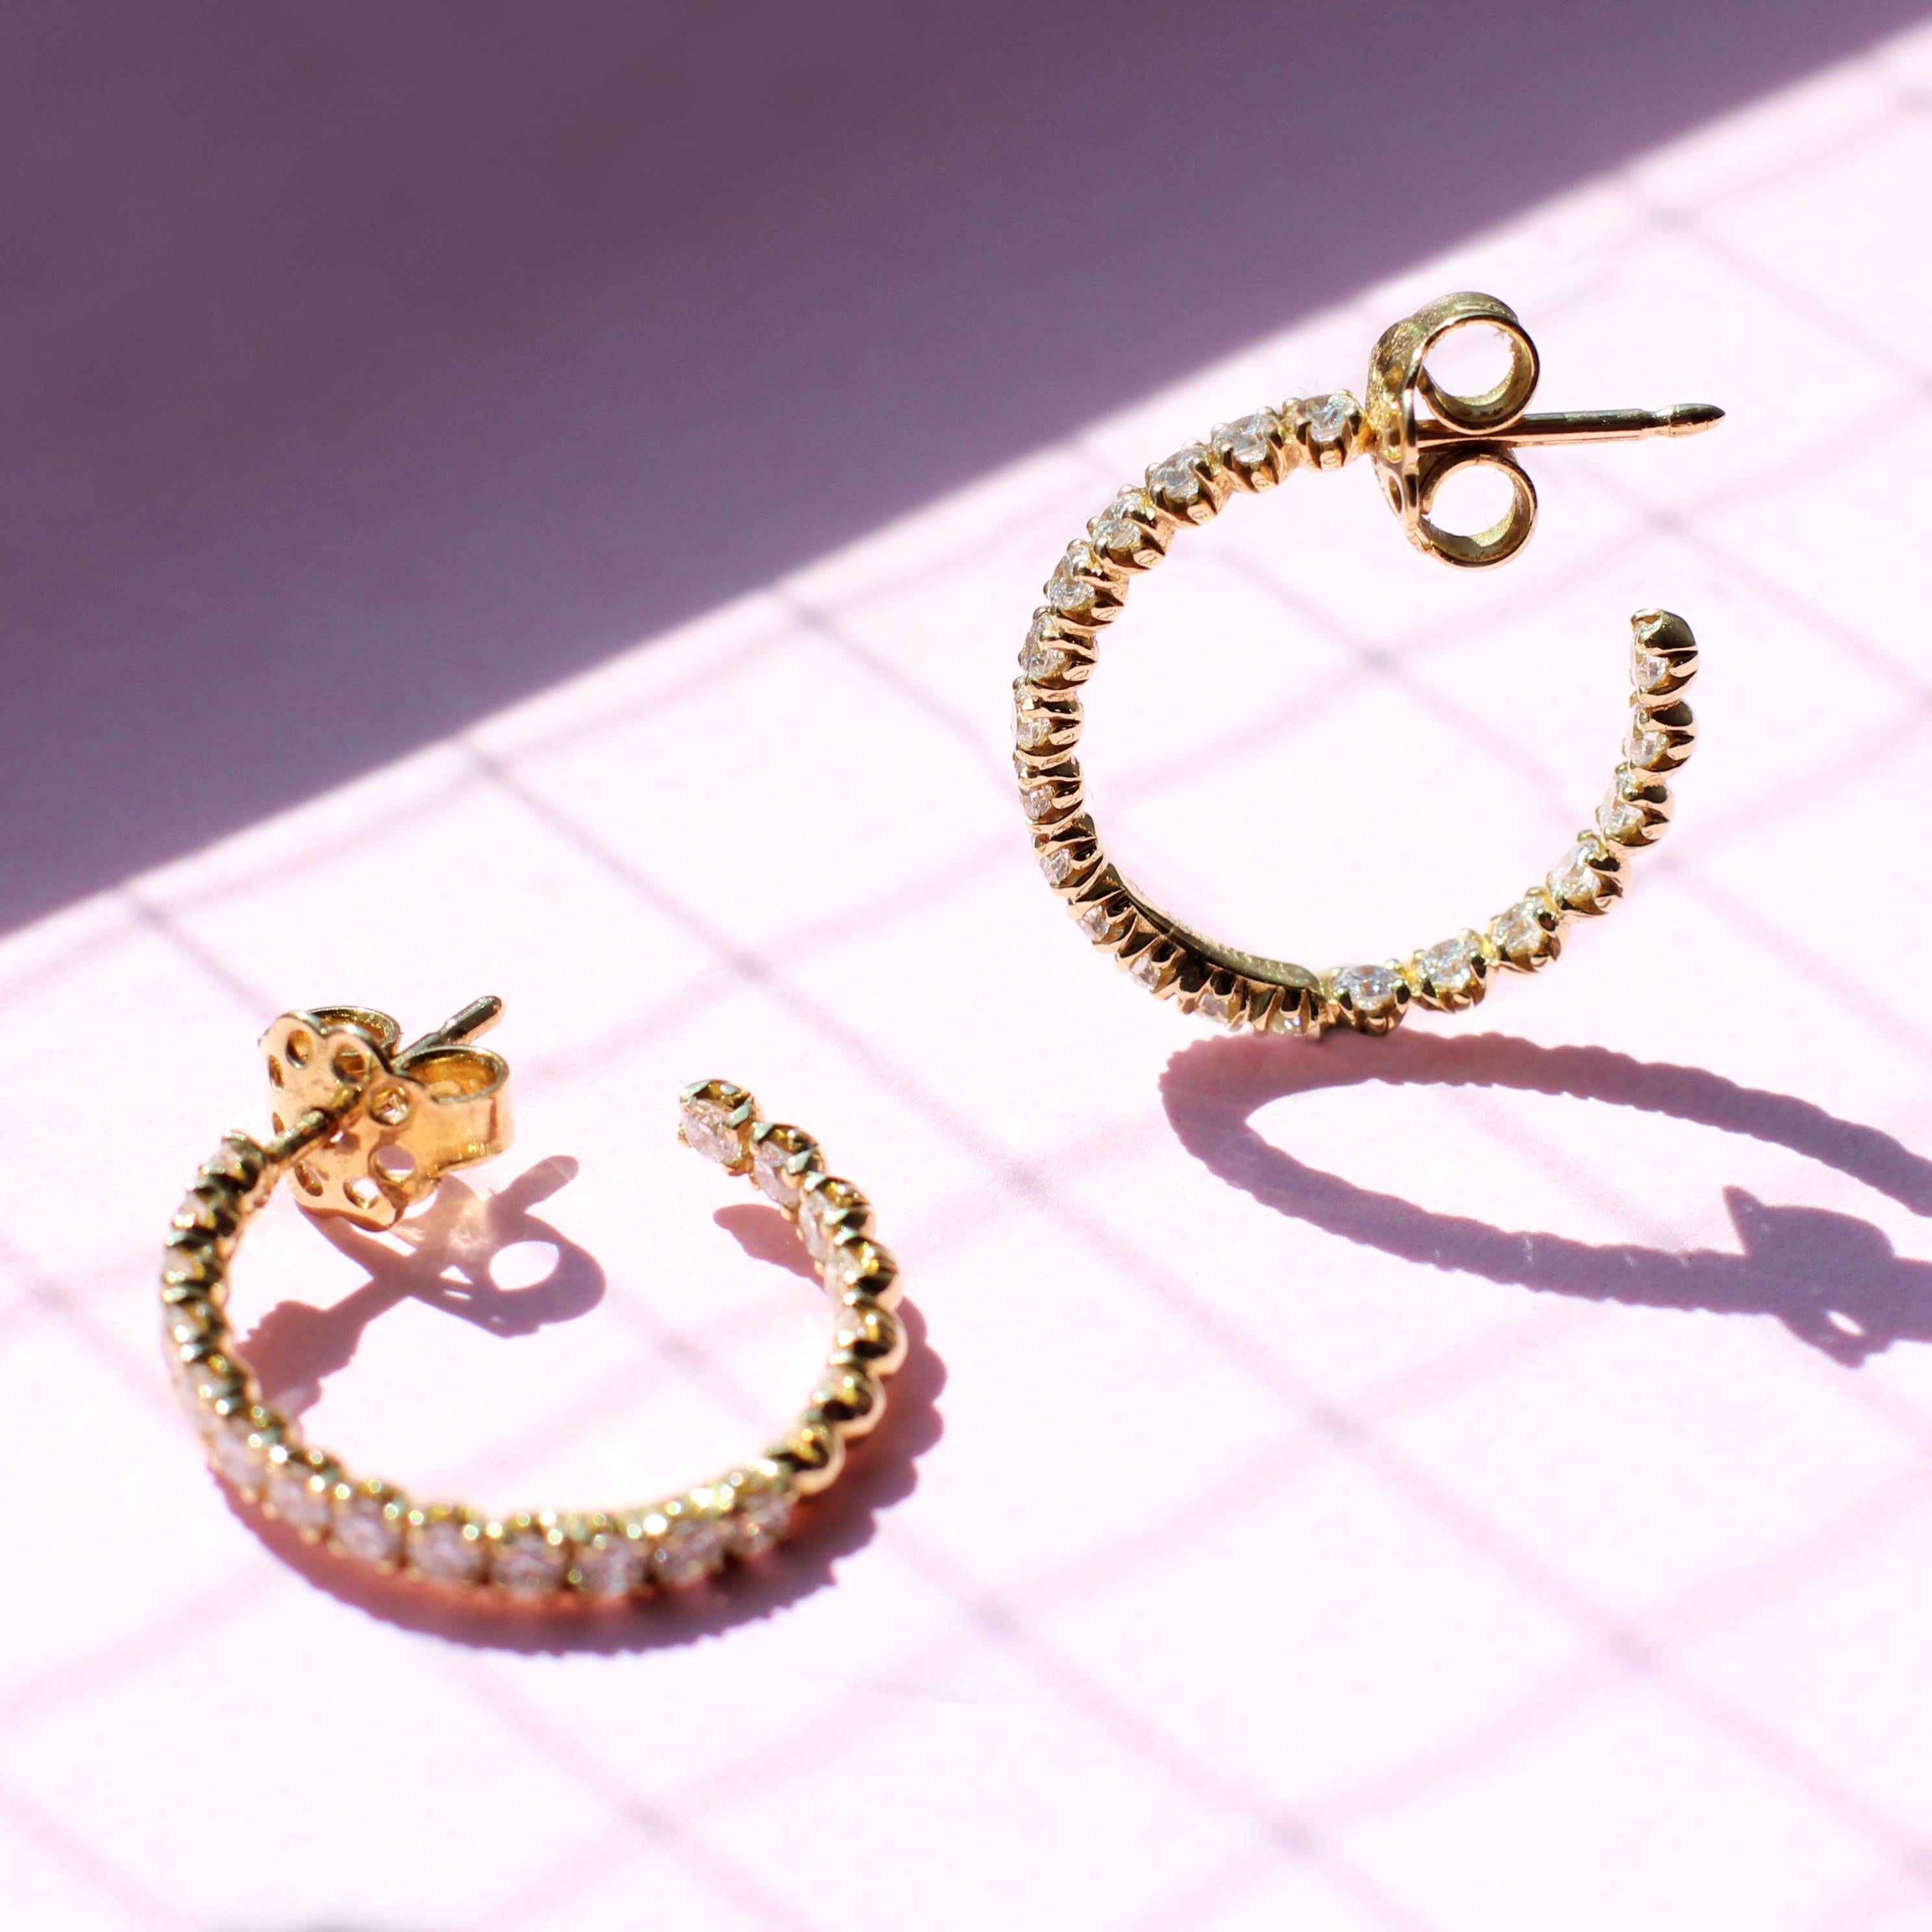 Glistening 18k yellow gold, white diamond ‘eternity’ hoops with a versatile and peculiar design that showcases diamonds set at the front and back for a glorious diamond-only view. These hoops will catch all the attention when worn solo, or be